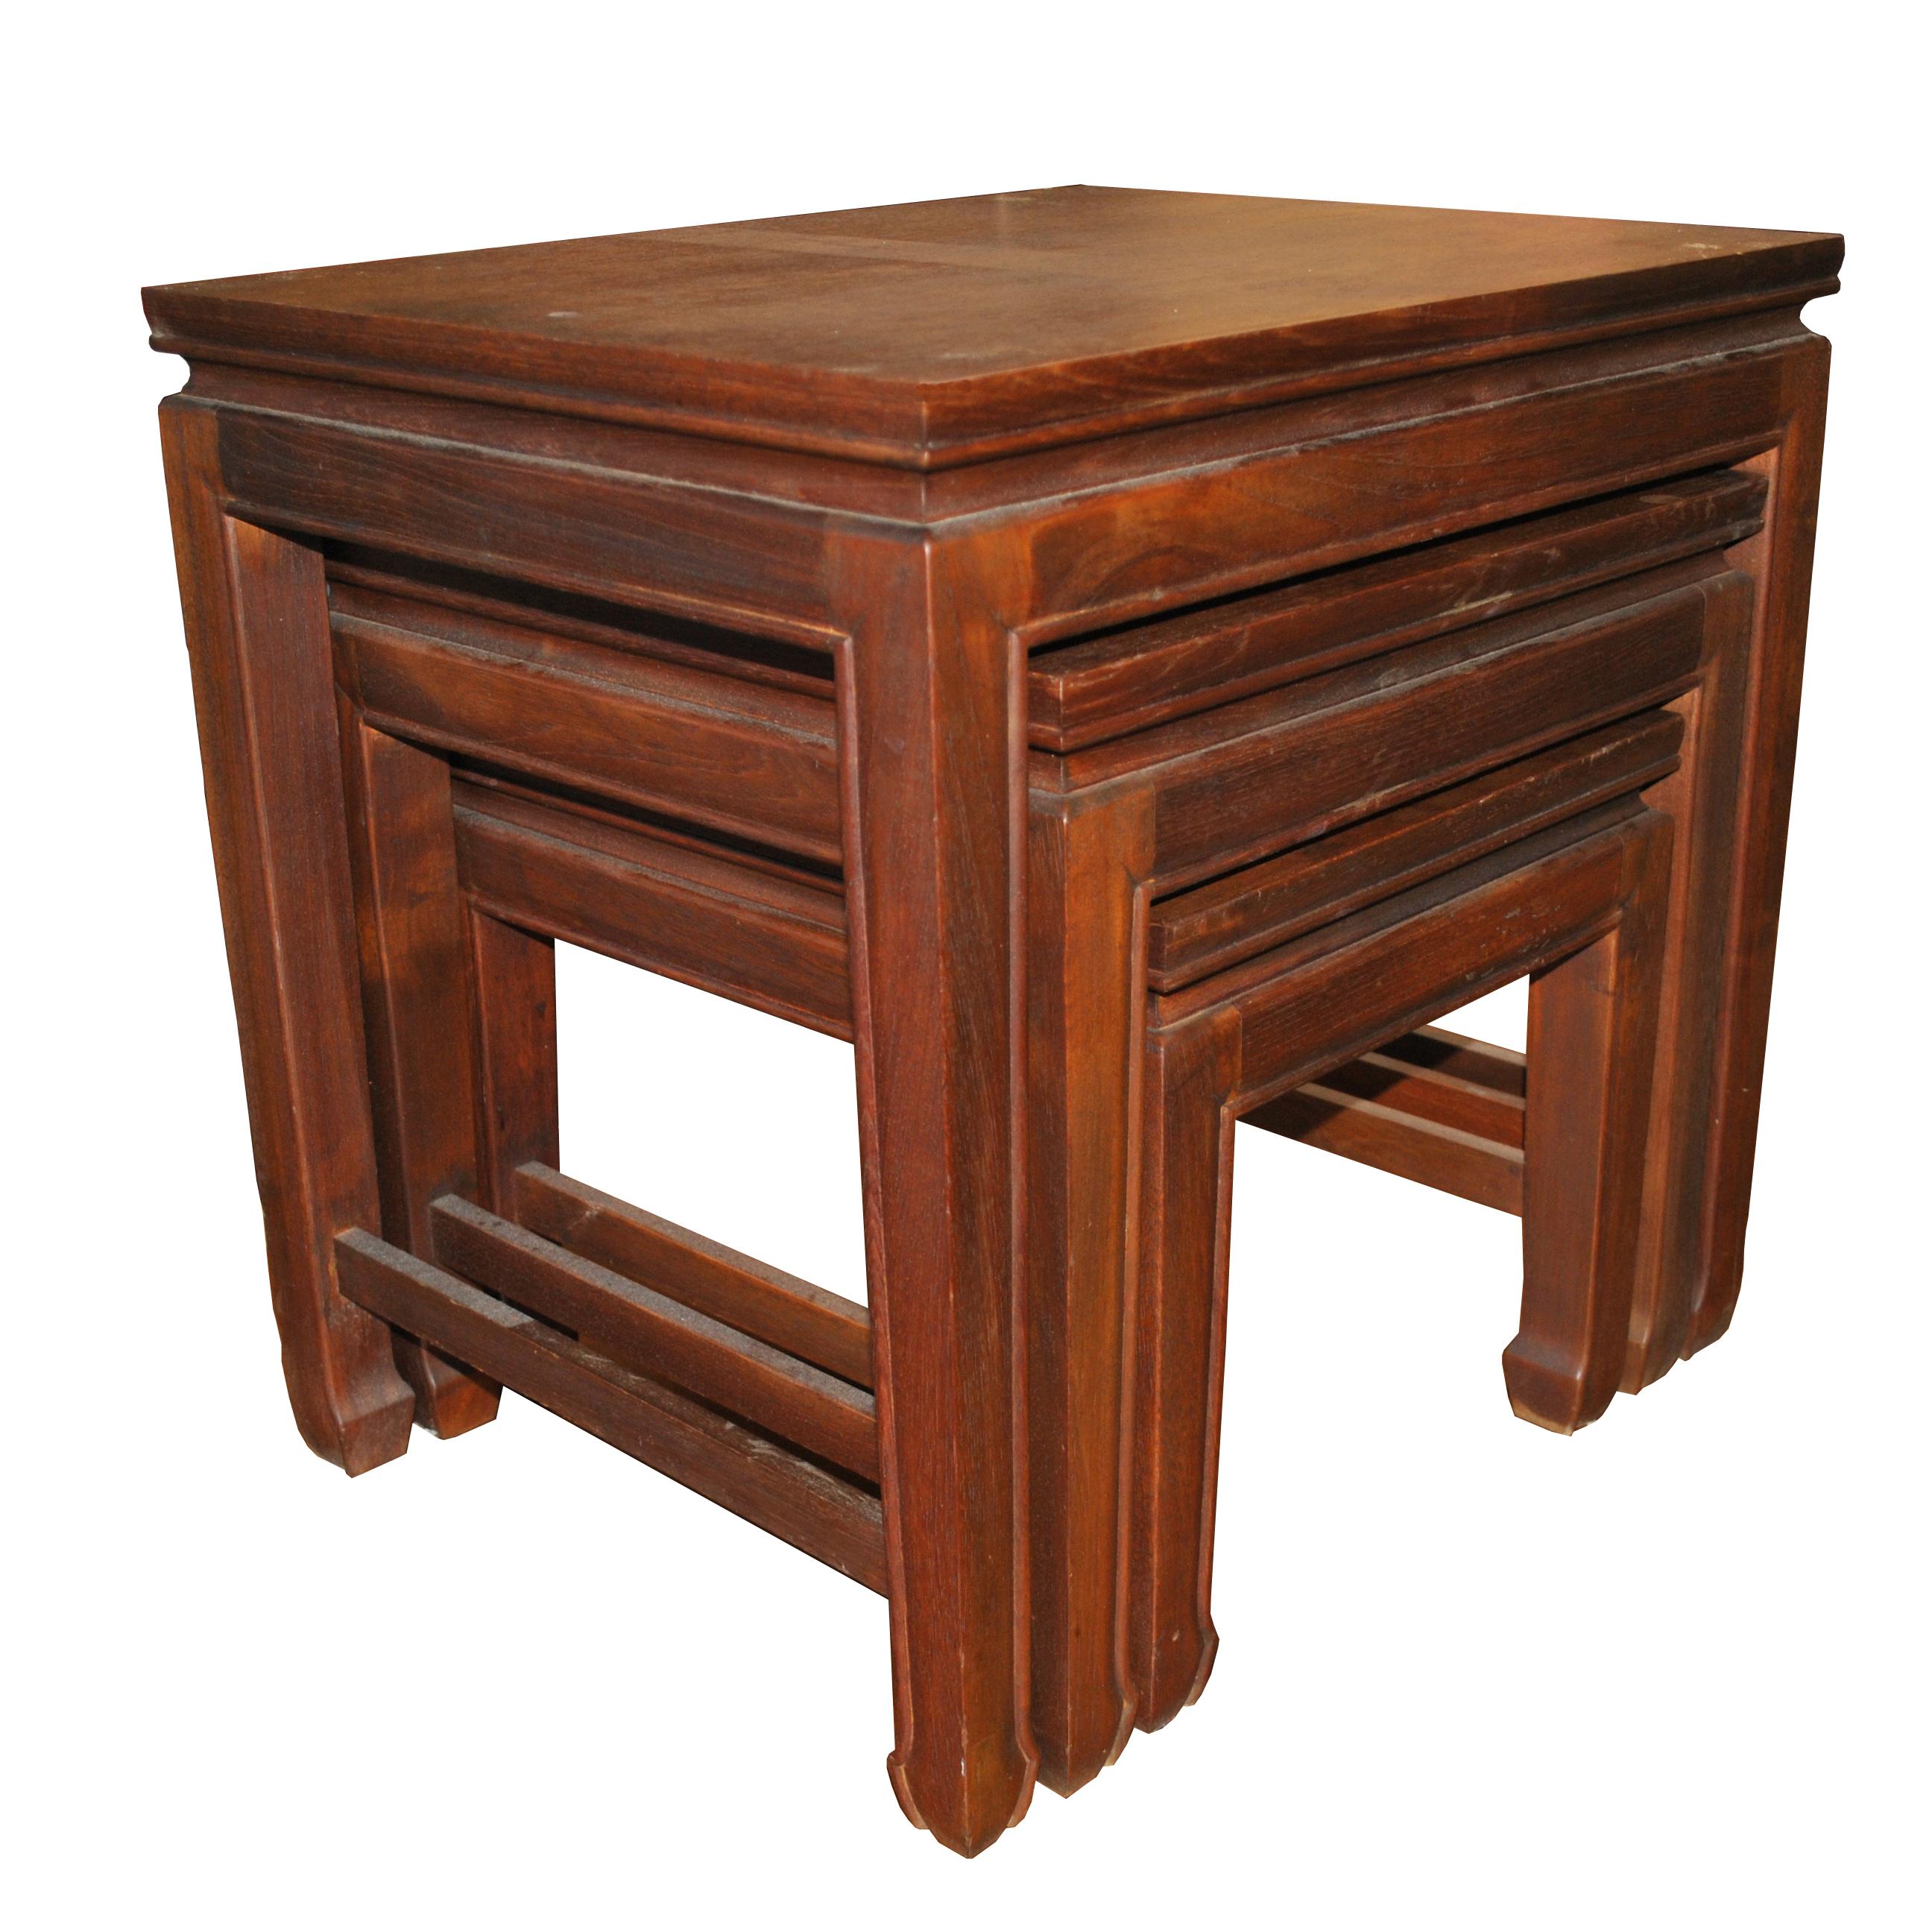 John’s Fine Furniture Factory

Set of Chin Hua Ming style nesting tables

Set of mahogany Ming style nesting tables by John's Fine Furniture of Taiwan.
 
Measures: 20